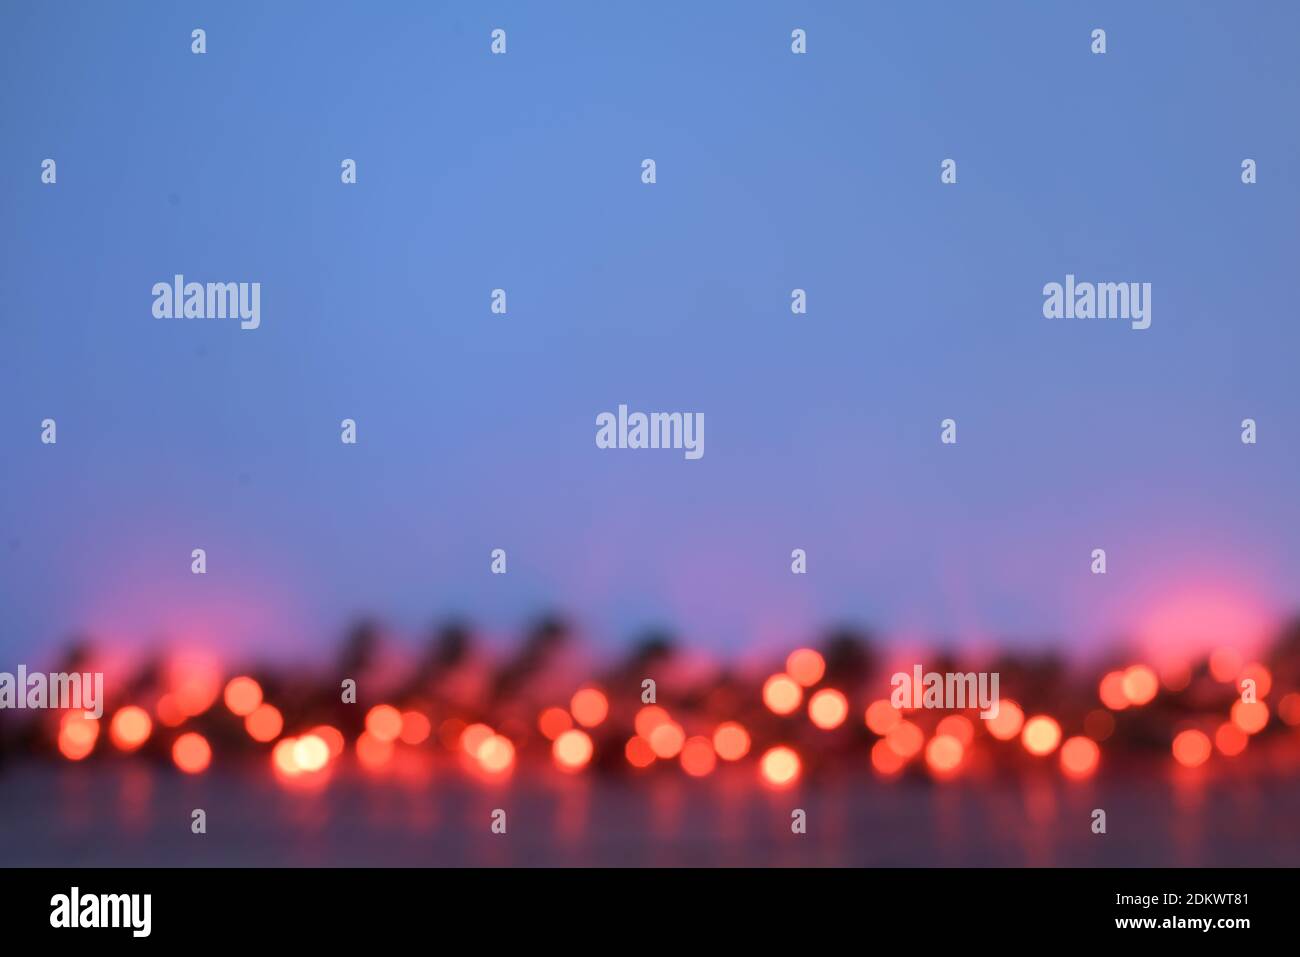 Defocused Christmas garland of red lights on a blue background Stock Photo